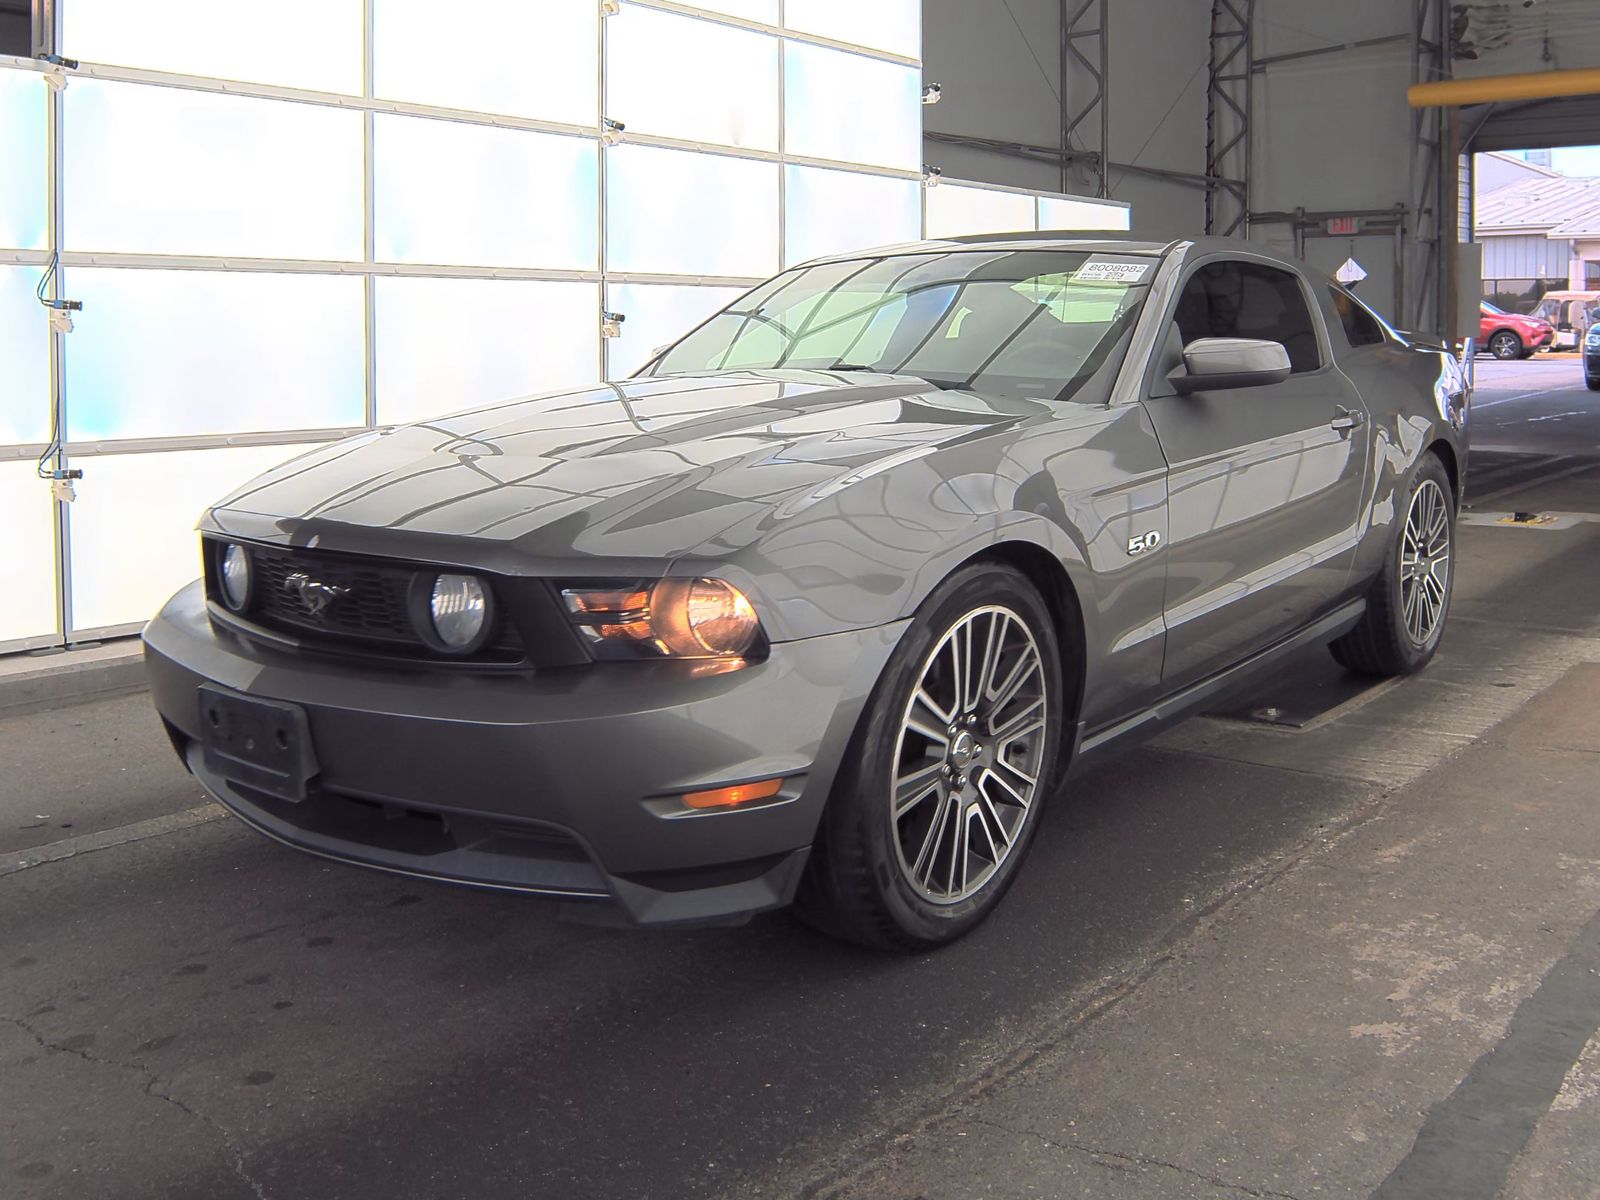 2011 Ford Mustang GT Premium RWD